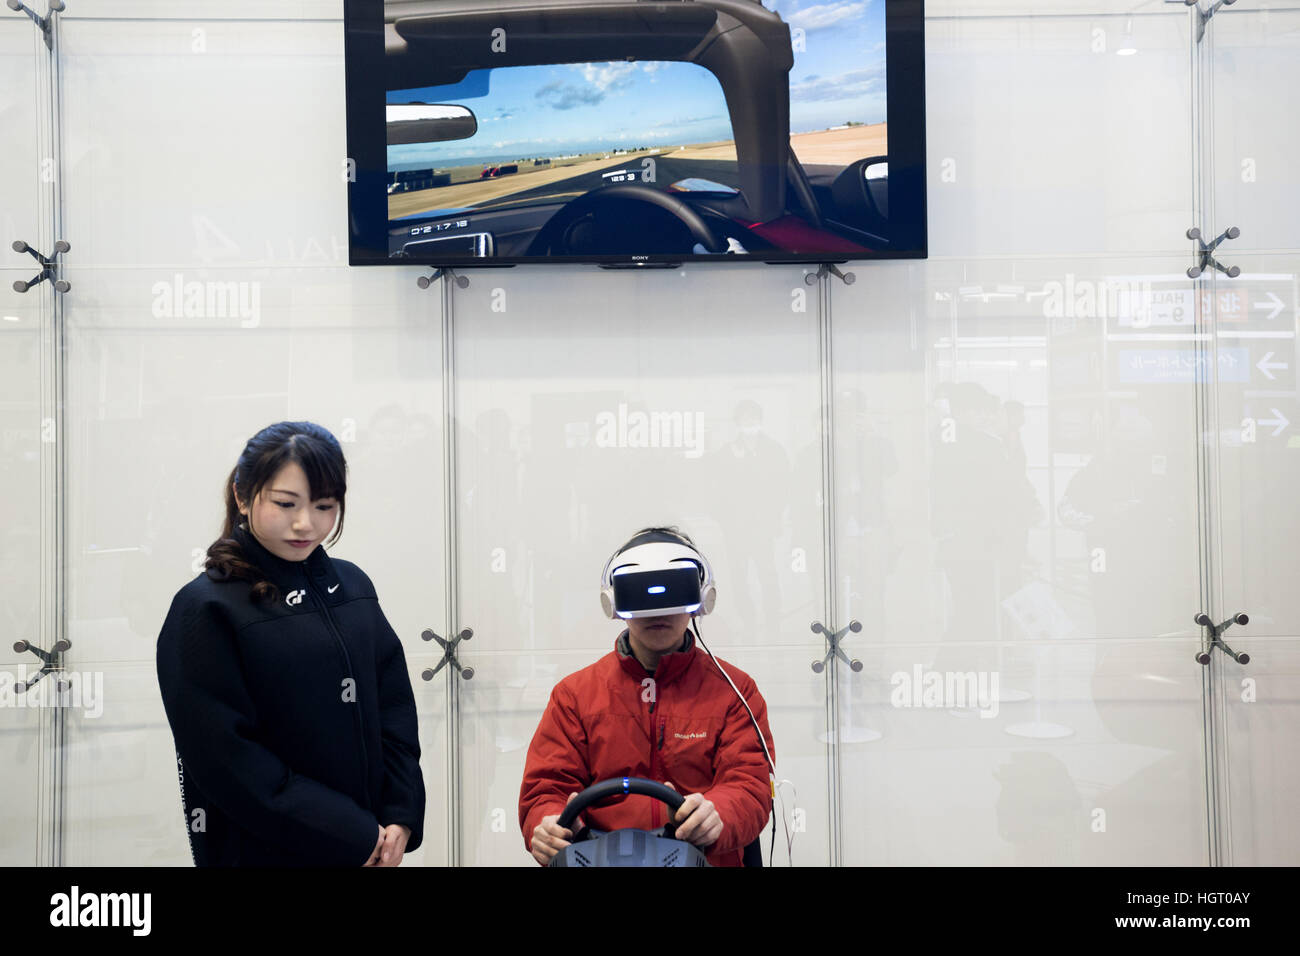 Tokyo, Japan. 13th Jan, 2017. Sony Interactive Entertainment Japan & Asiaha have Gran Turismo Sport PlayStation VR during the Tokyo Auto Salon 2017. Tokyo Auto Salon is Japan's largest show for custom cars with 417 automobile-related exhibitors displaying their latest cars, products. © Alessandro Di Ciommo/ZUMA Wire/Alamy Live News Stock Photo